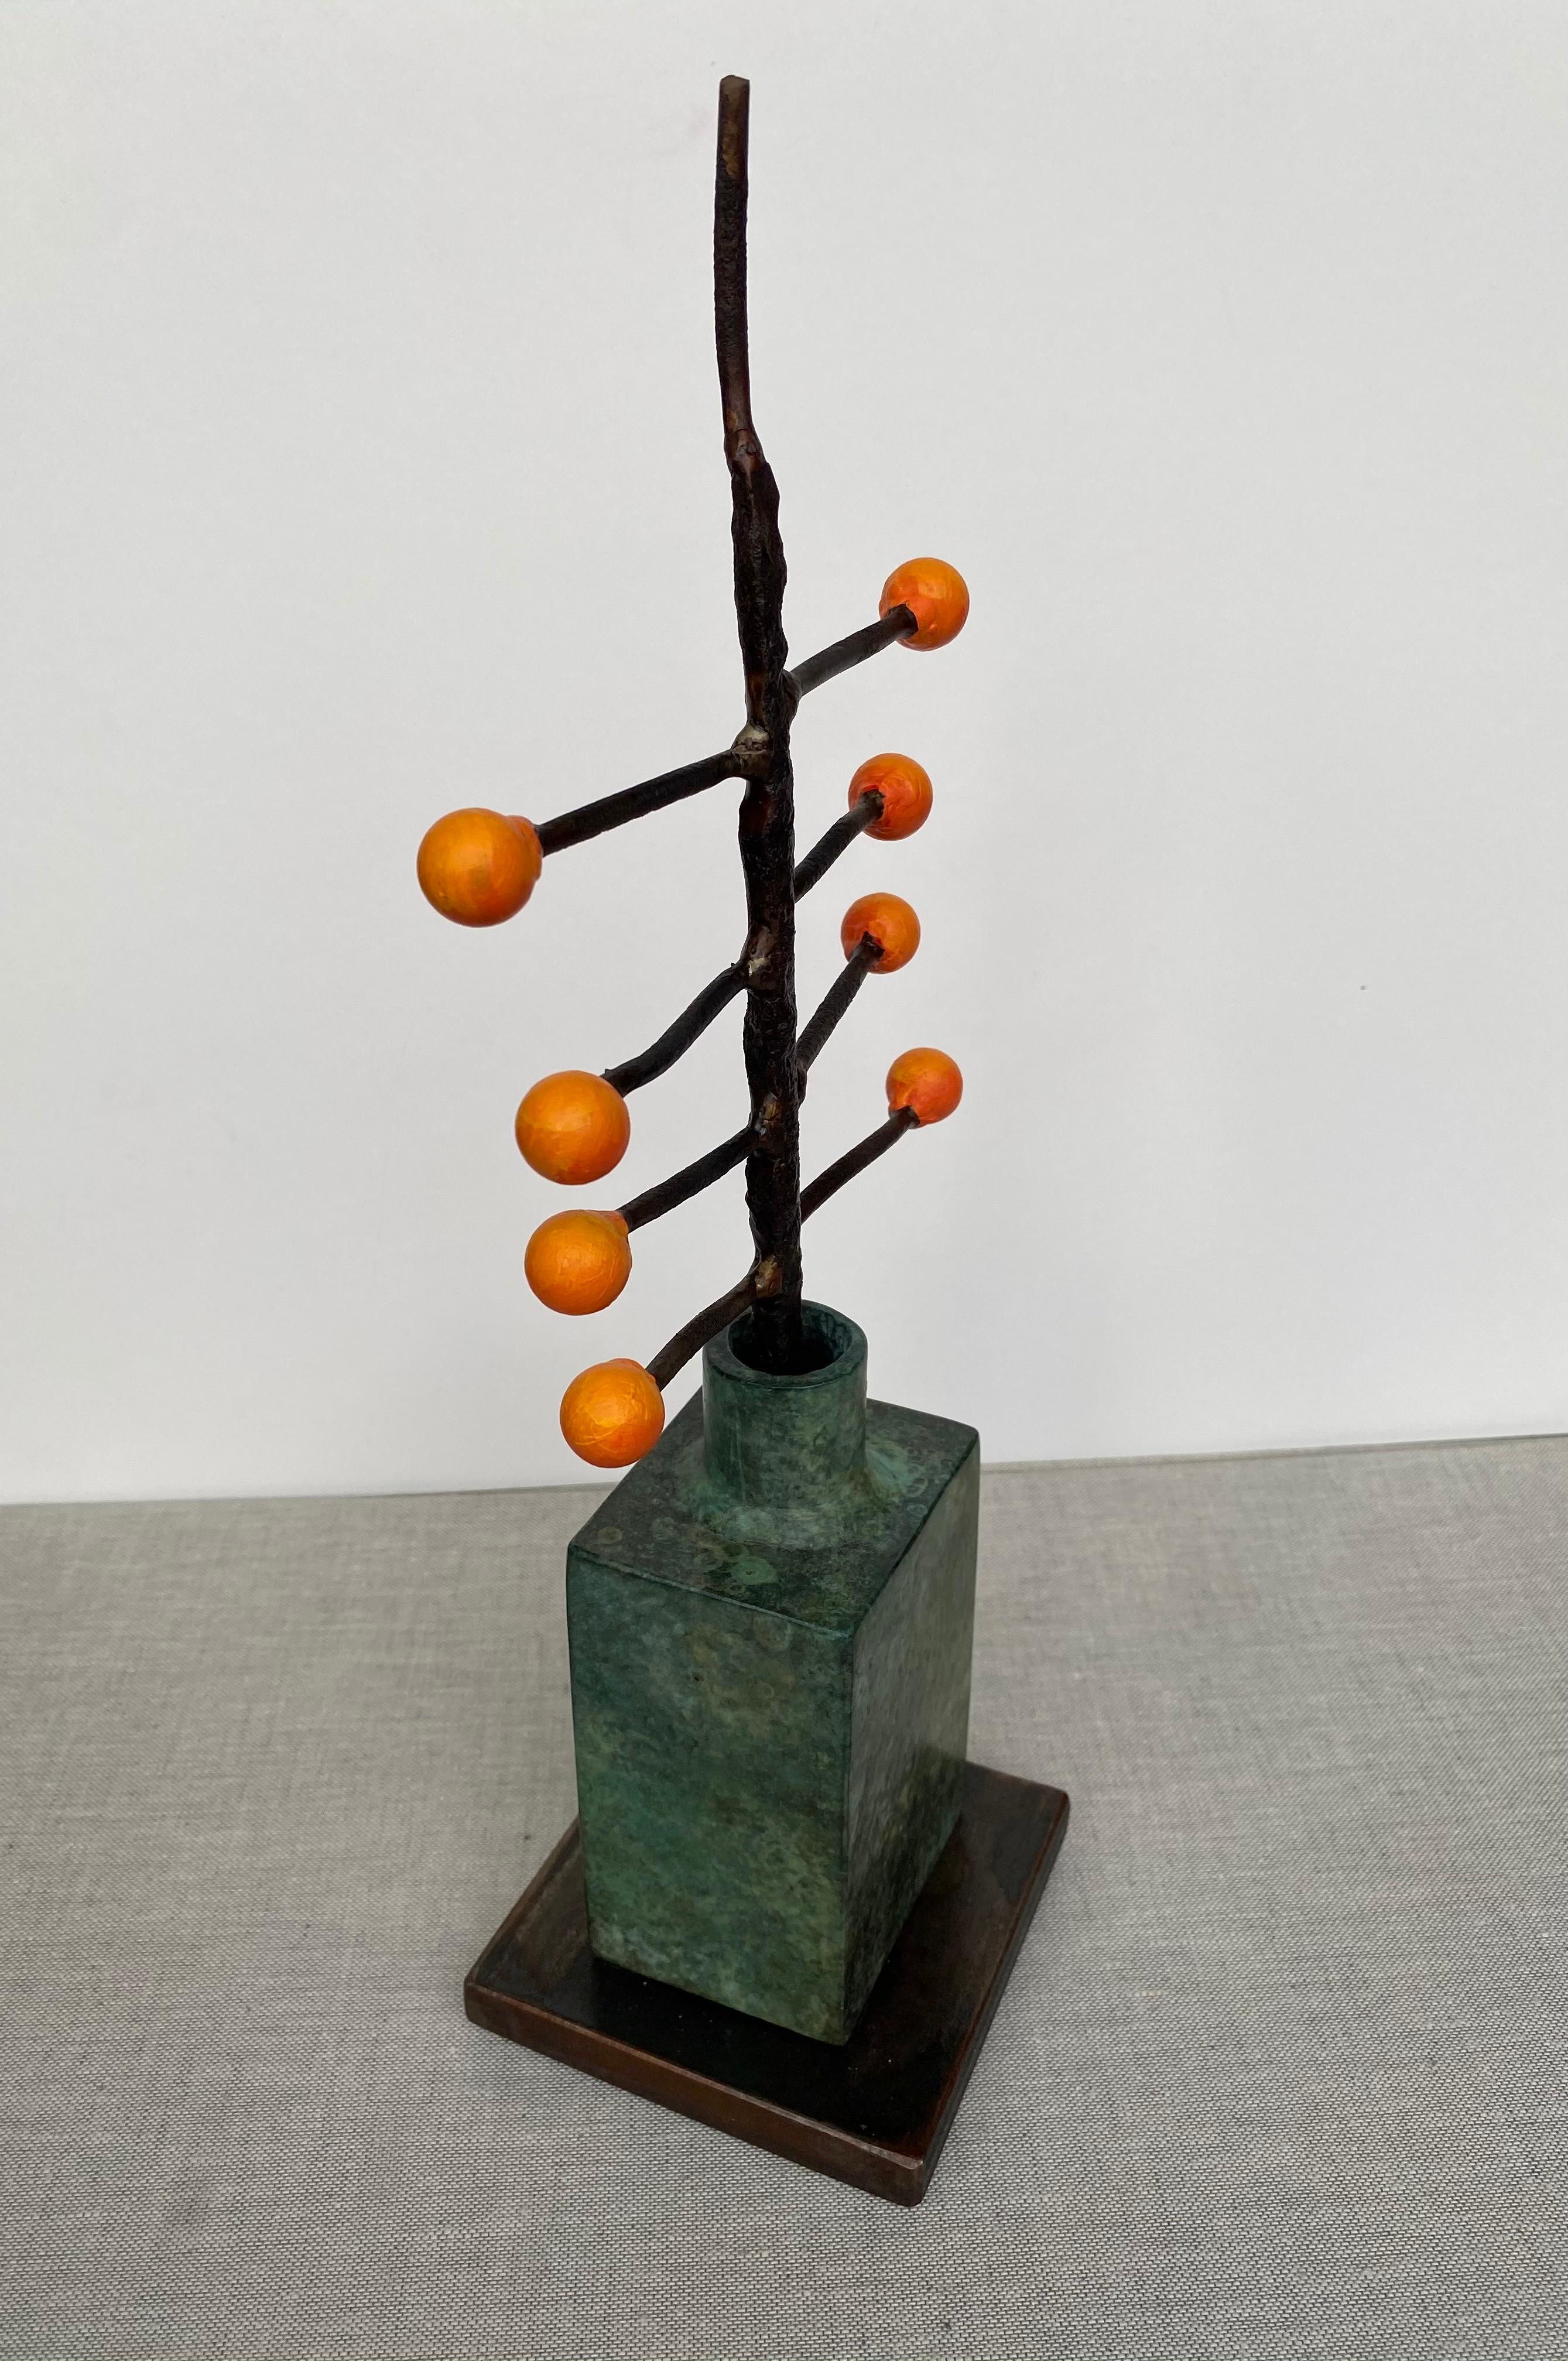 'Fall Seeds' by David Kimball Anderson, 2020. Bronze, steel, and paint, 14 x 4 x 4 in. This sculpture features a round vase cast in bronze and finished in varying patinas of light and dark green.  8 bright orange bulbs extend off of steel